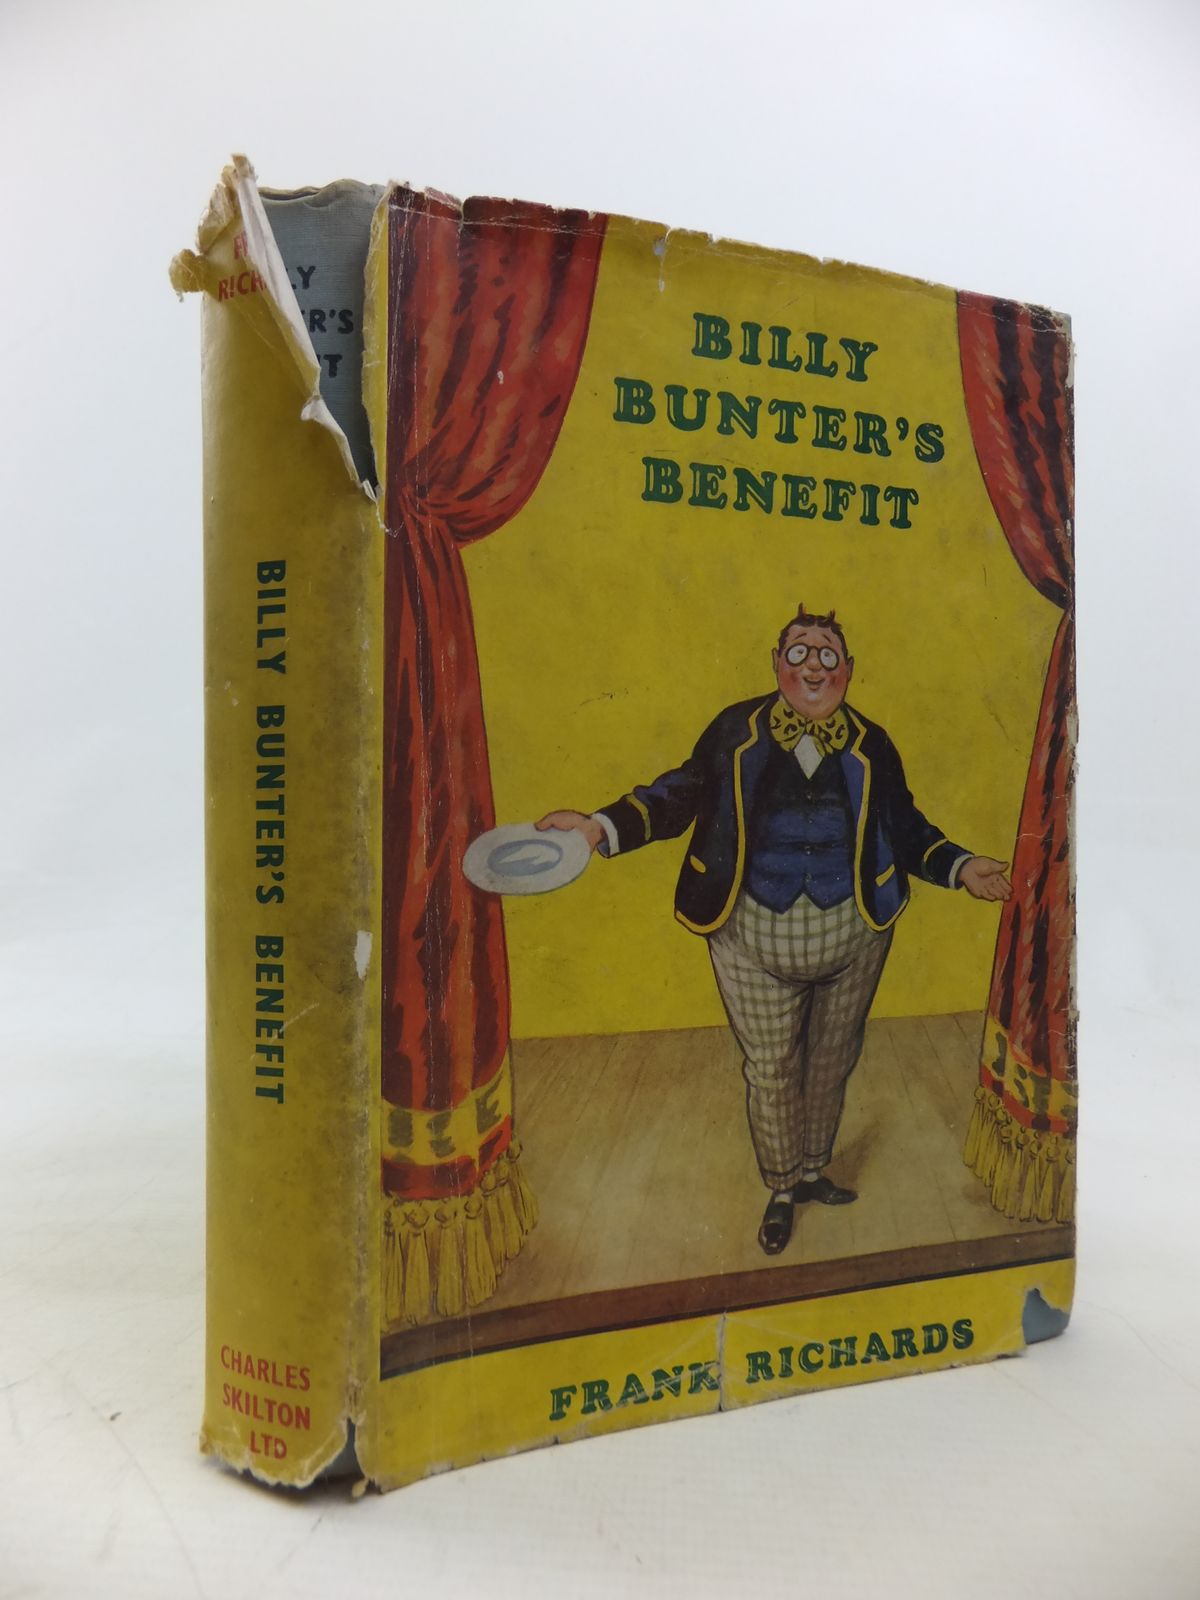 Photo of BILLY BUNTER'S BENEFIT written by Richards, Frank illustrated by Macdonald, R.J. published by Charles Skilton Ltd. (STOCK CODE: 1810521)  for sale by Stella & Rose's Books